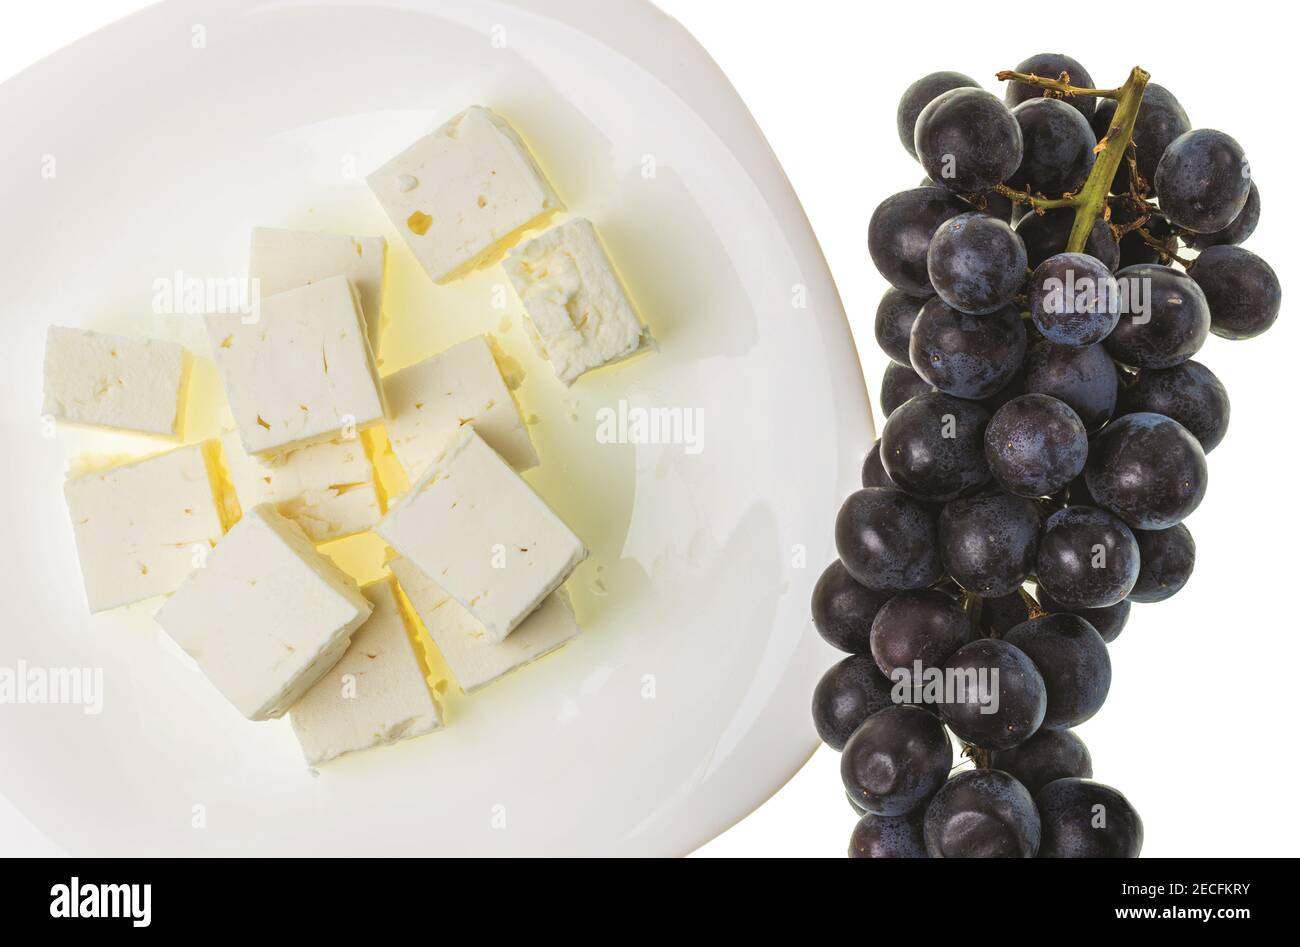 Close up view of black grape and brined white Feta cheese on white background. Healthy eating concept. Stock Photo